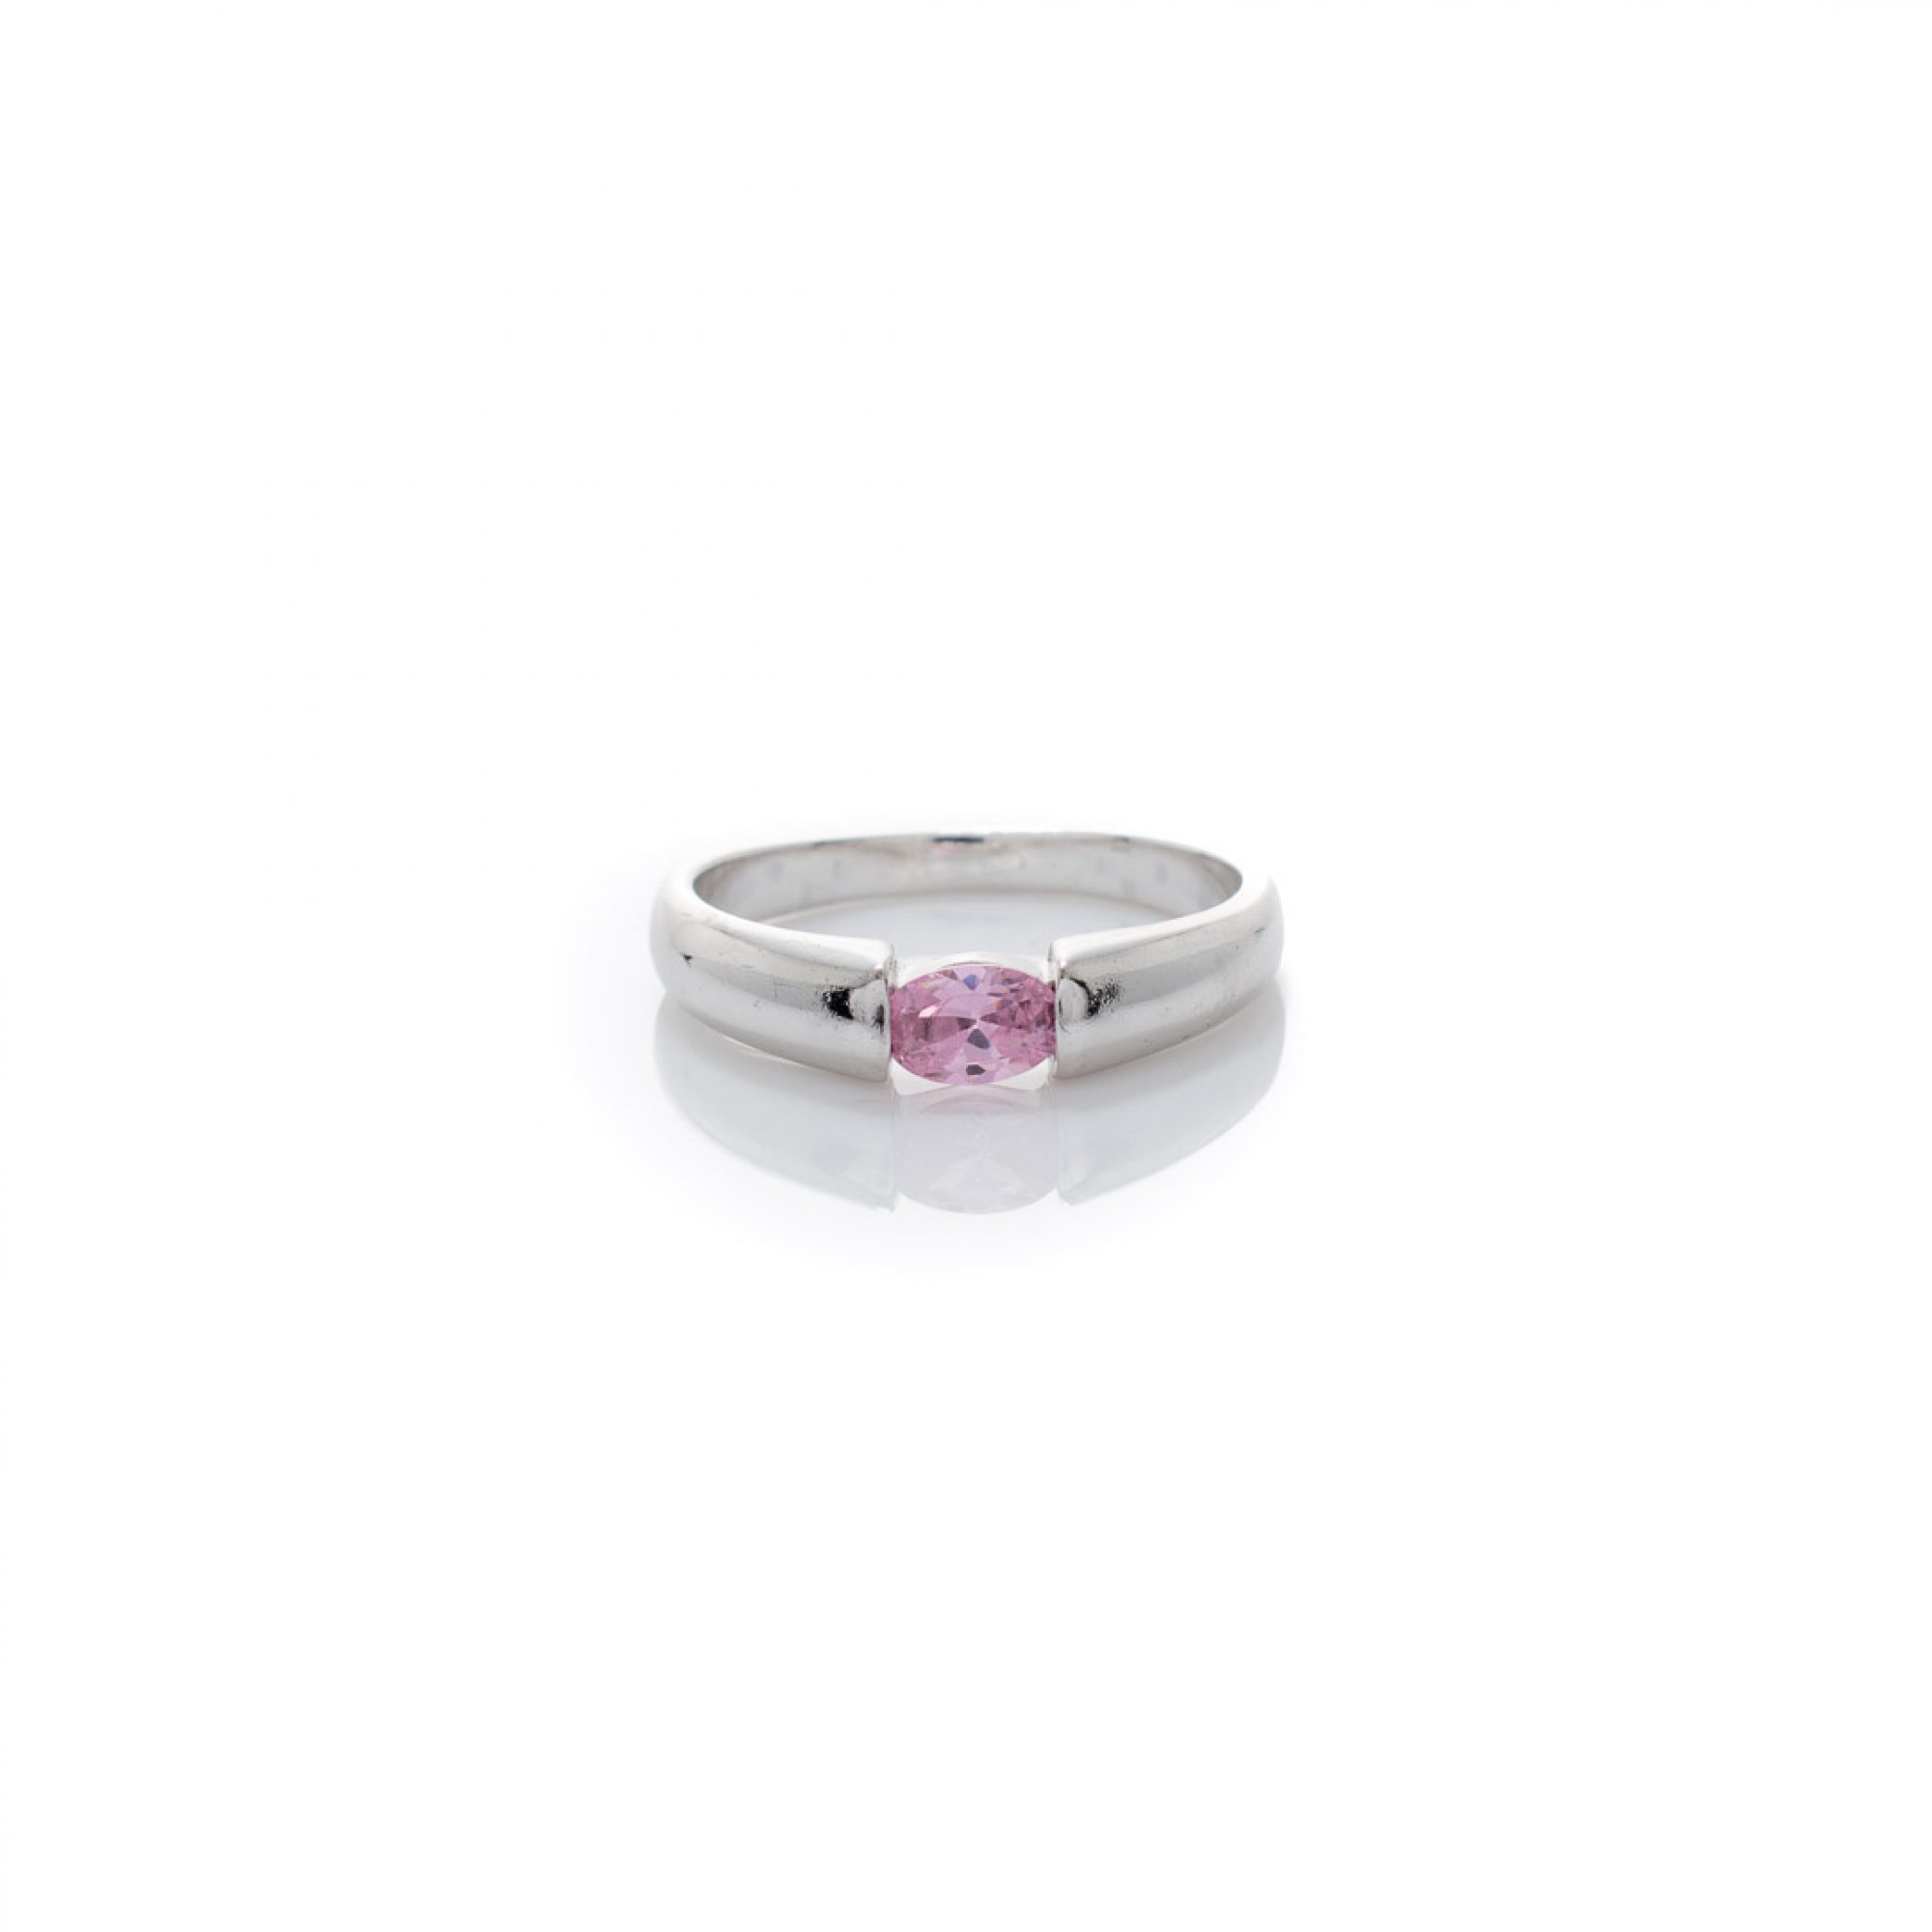 Silver ring with pink quartz stone